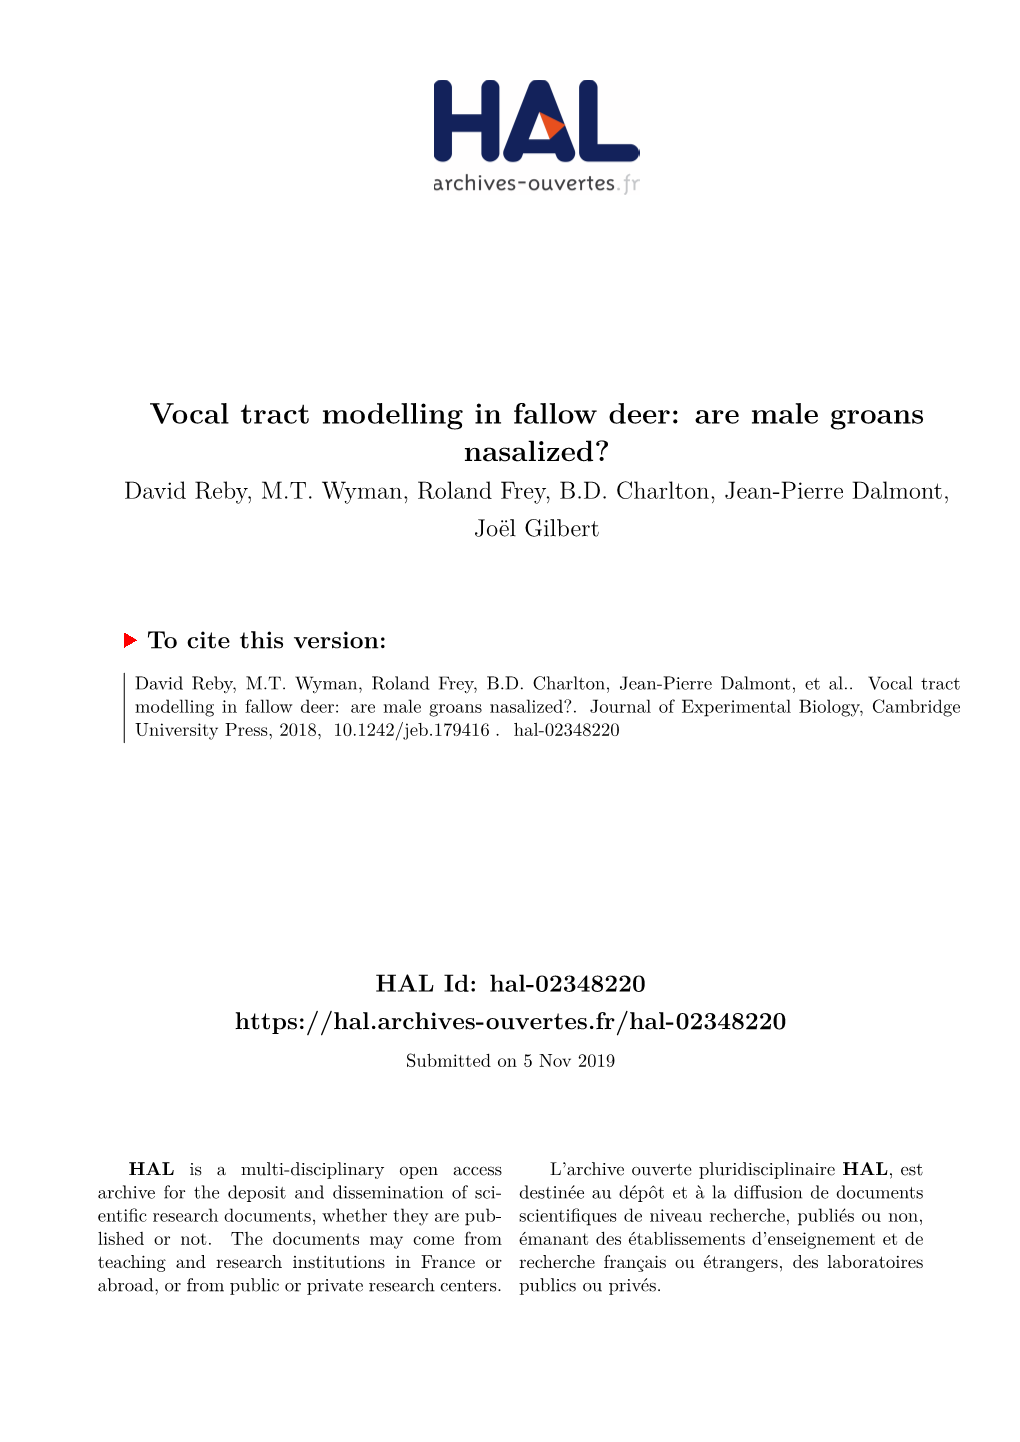 Vocal Tract Modelling in Fallow Deer: Are Male Groans Nasalized? David Reby, M.T